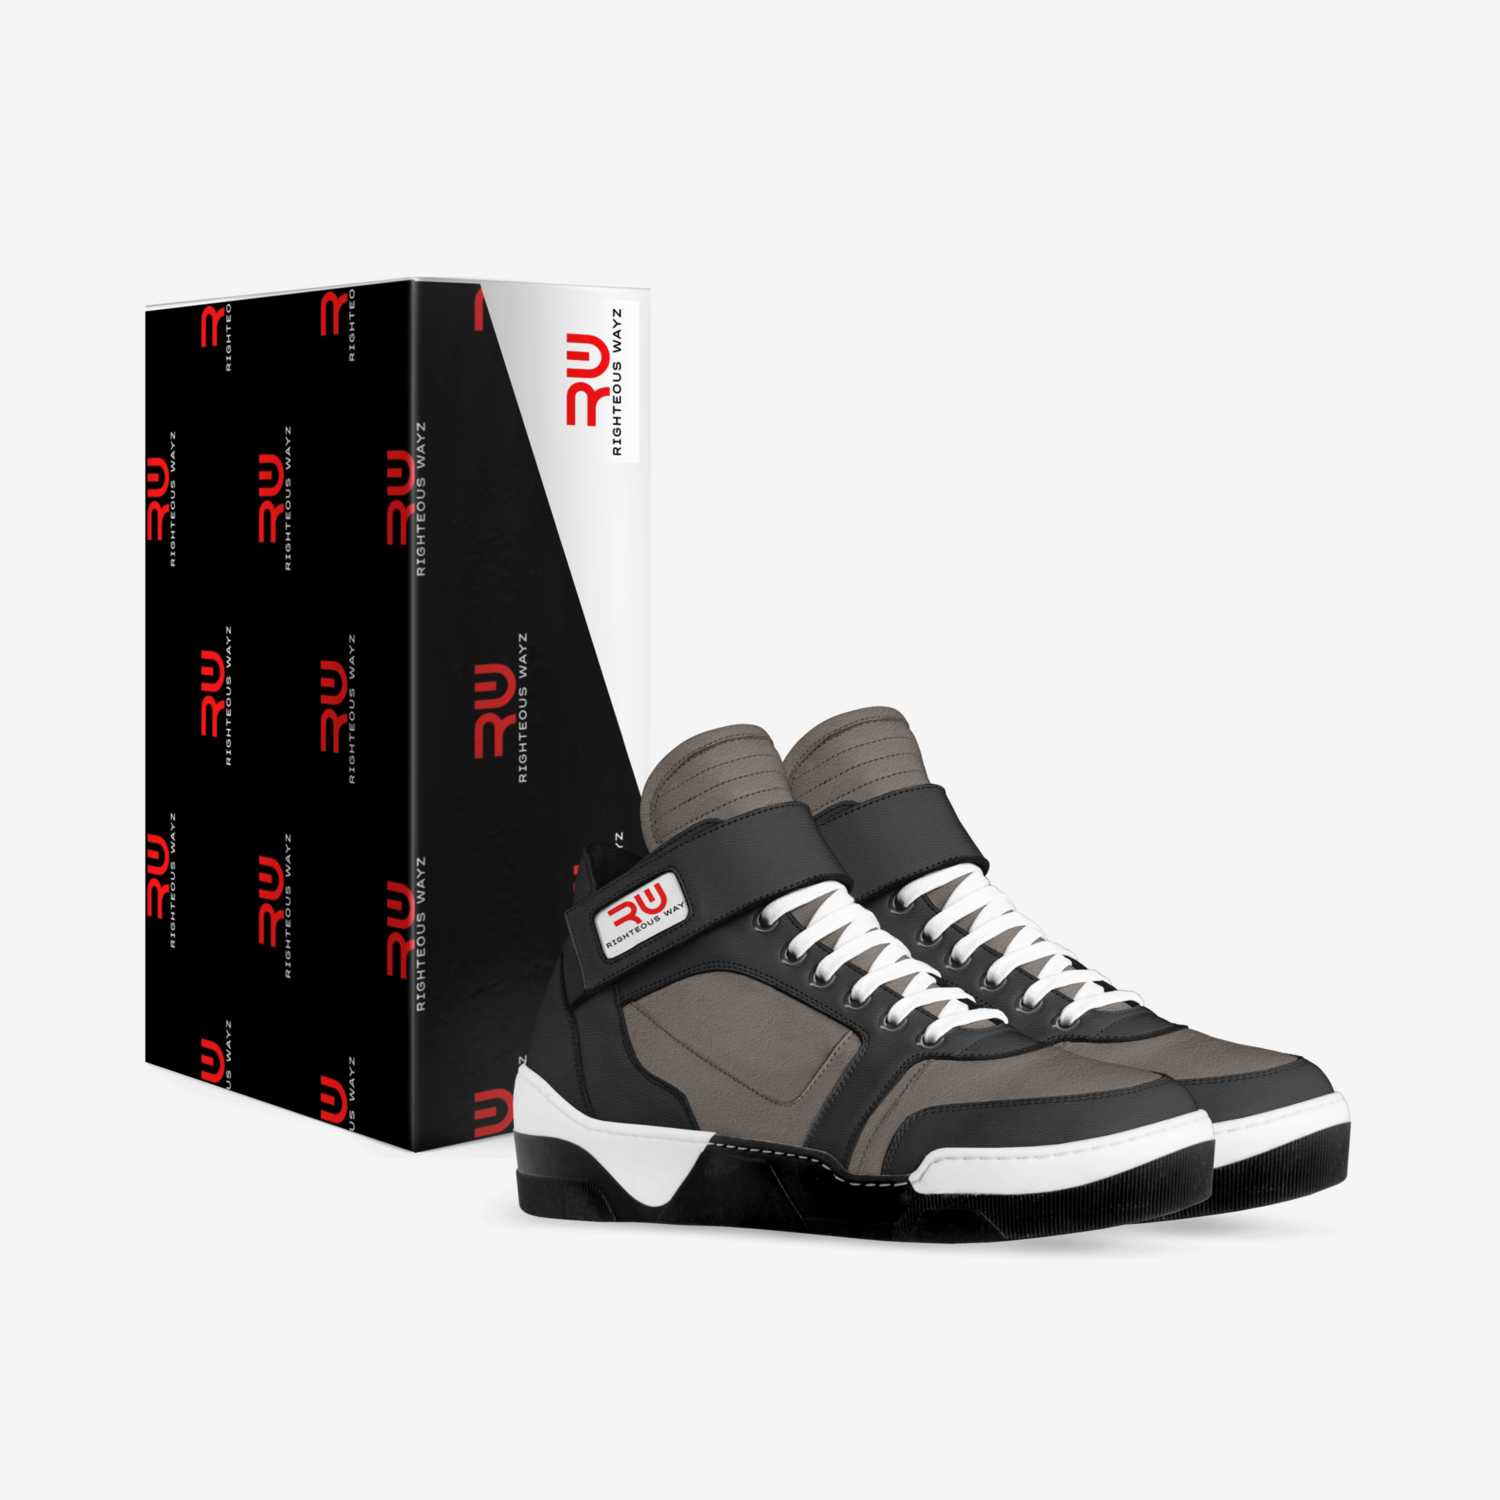 Righteous Wayz custom made in Italy shoes by Meco Shavers | Box view